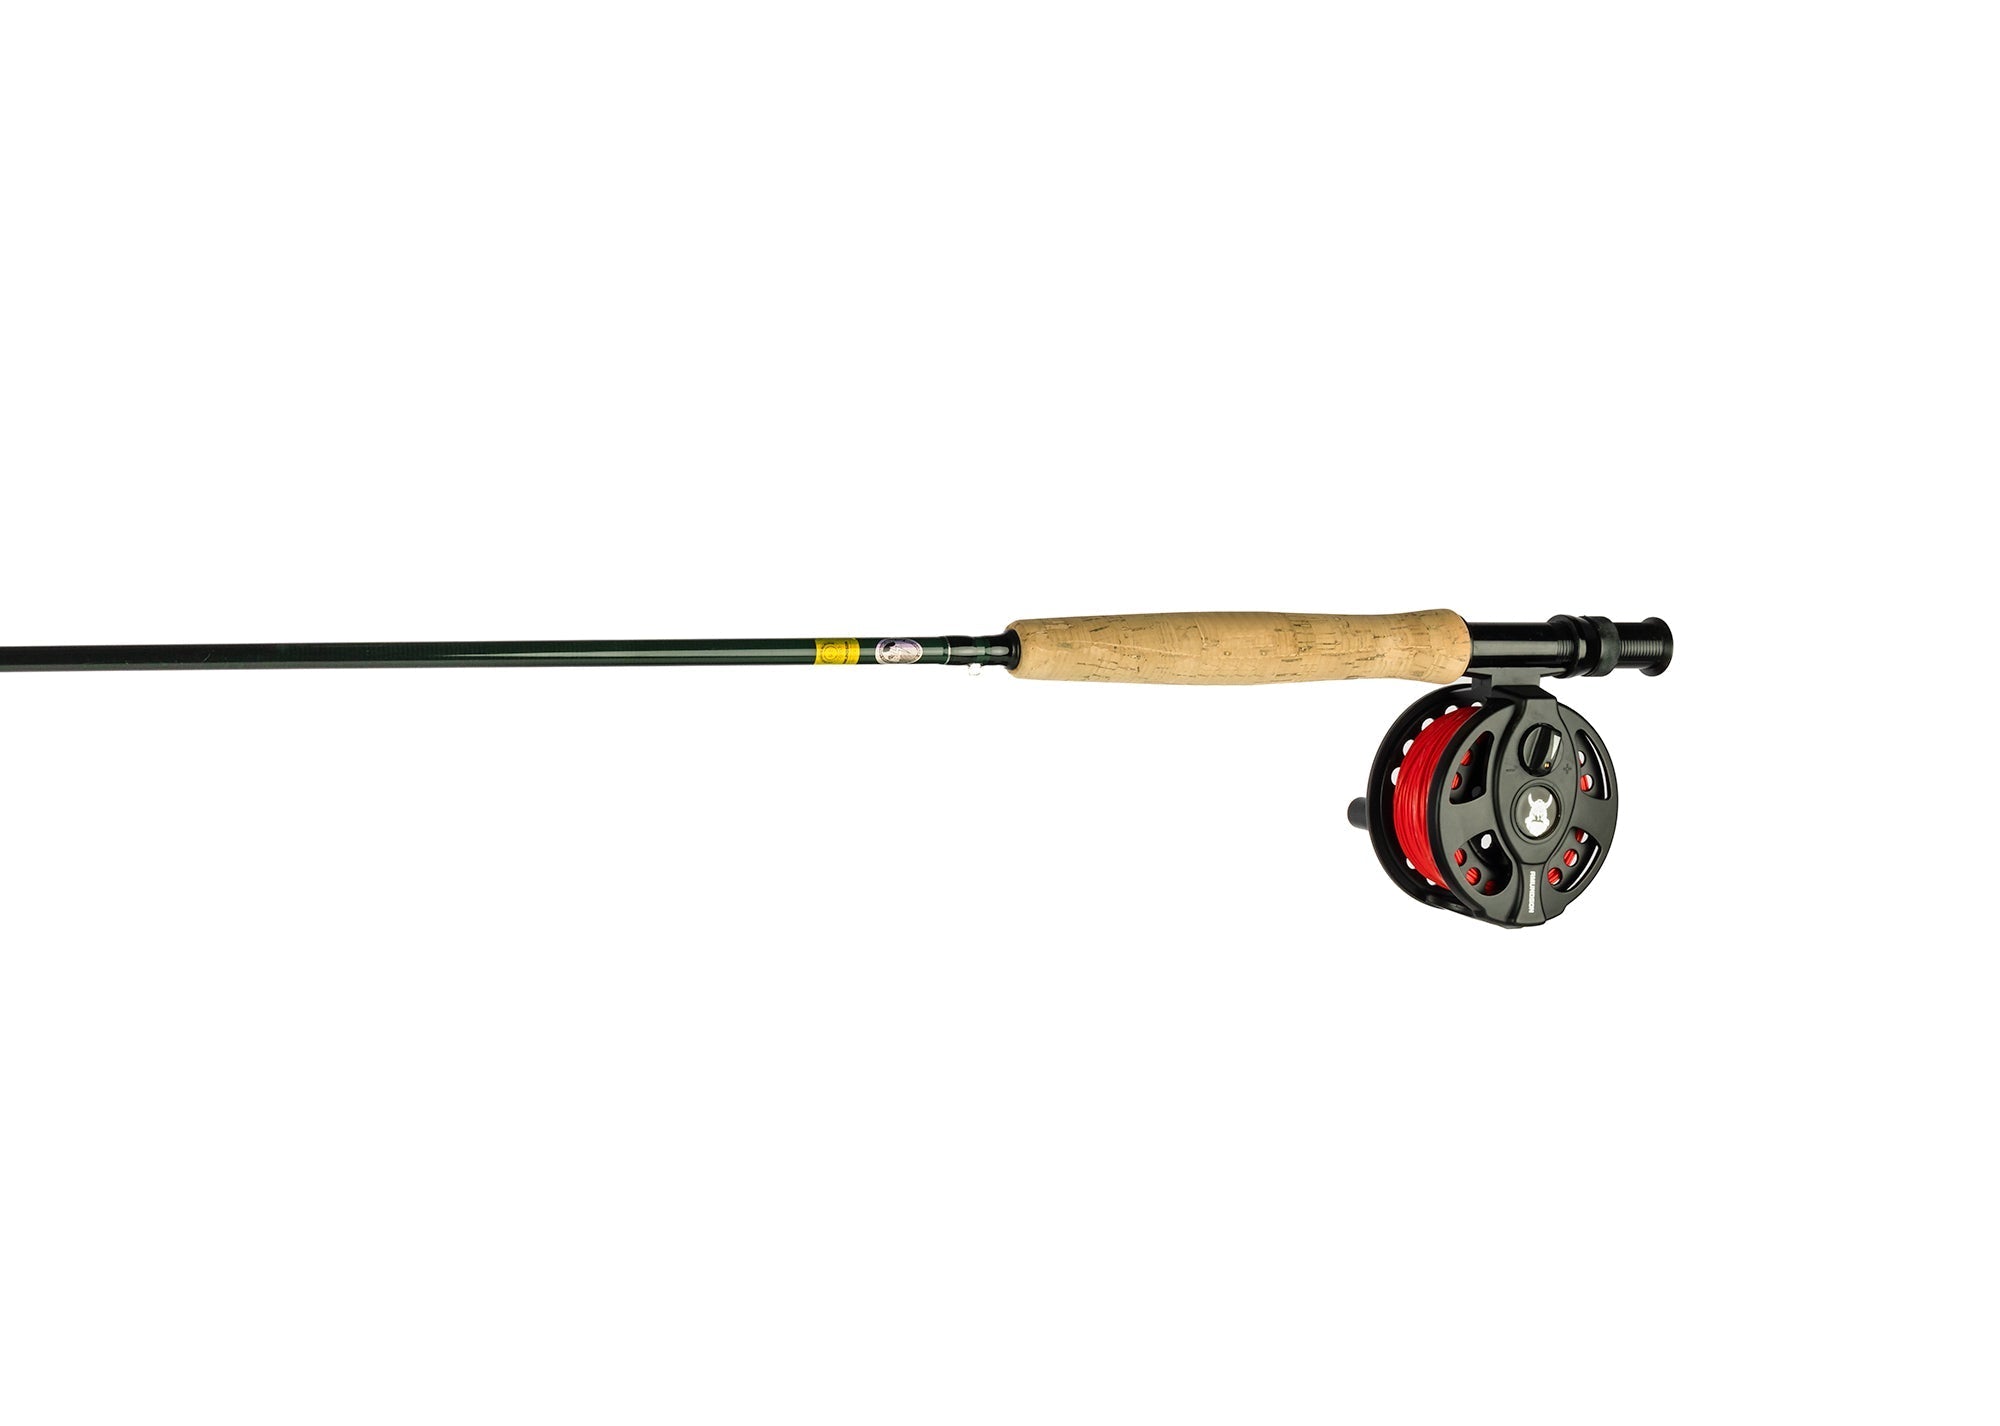 Fly Fishing Kits & Combos - Wind River Outdoor